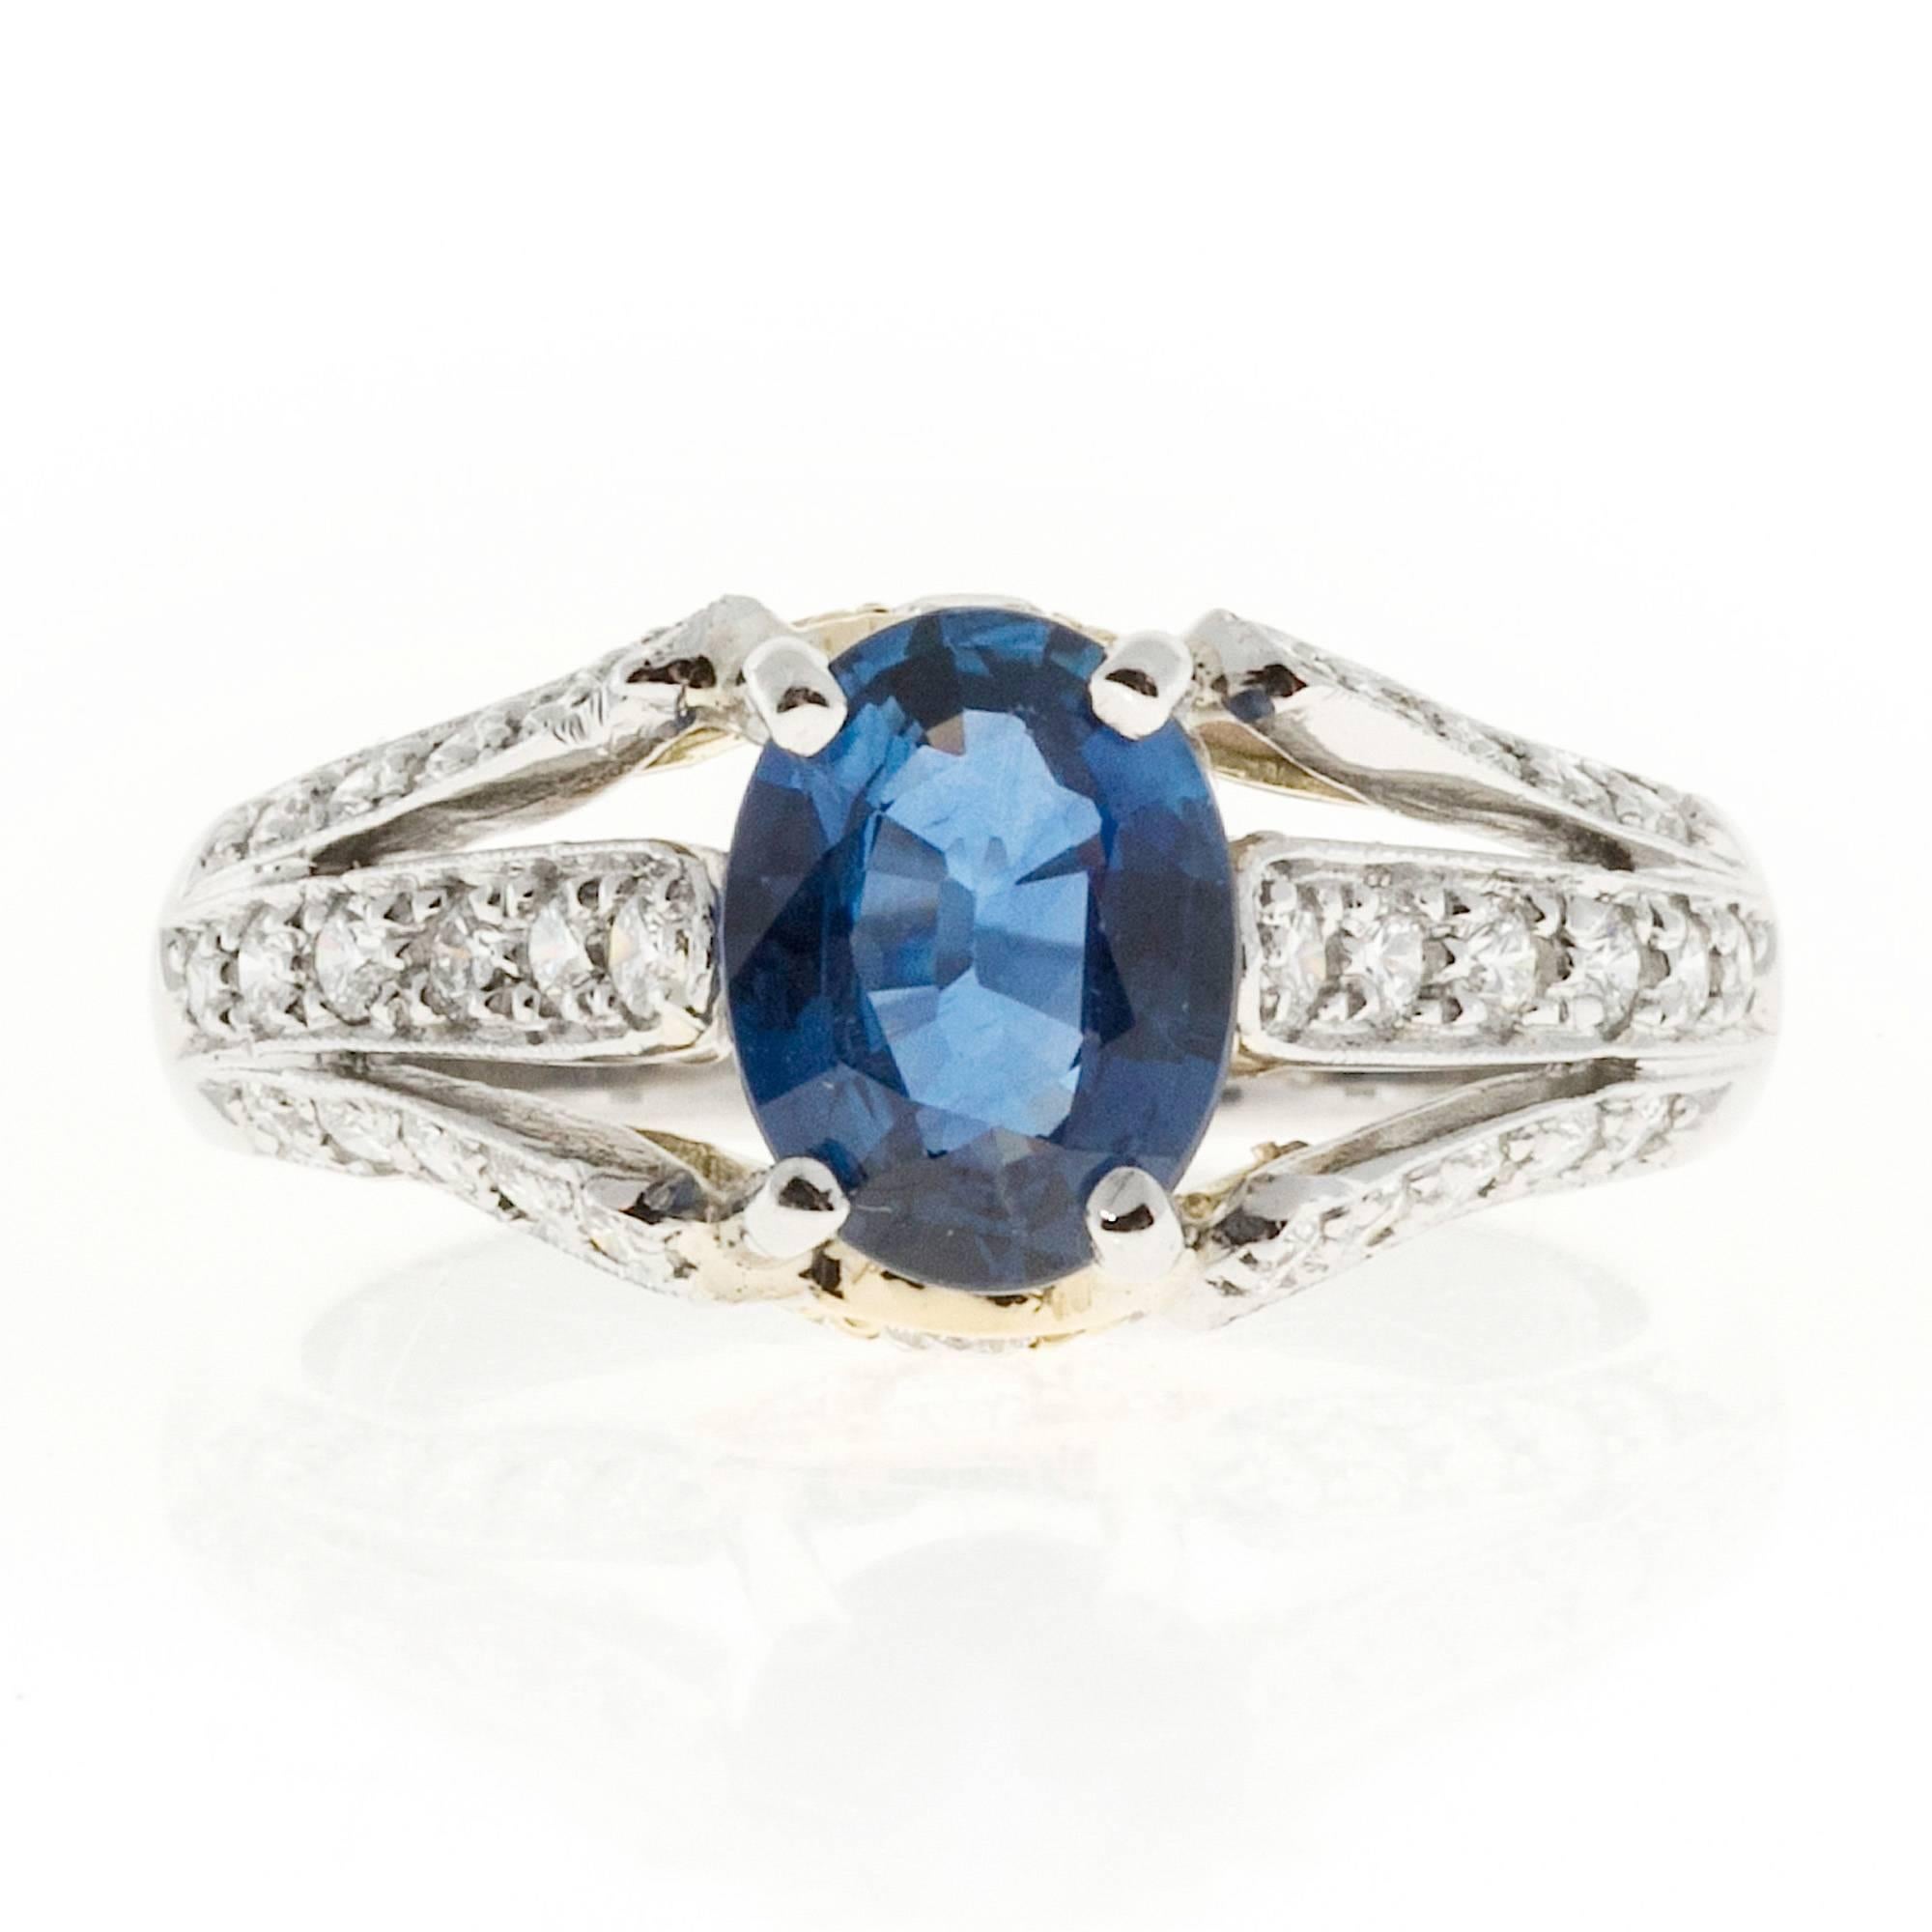 Richard Krementz Custom made top gem bright blue Sapphire and diamond engagement ring in Platinum with 18k yellow gold.  

1 oval gem blue Sapphire, approx. total weight 1.28cts, simple heat only, GIA certificate #2171426206
38 round diamonds,